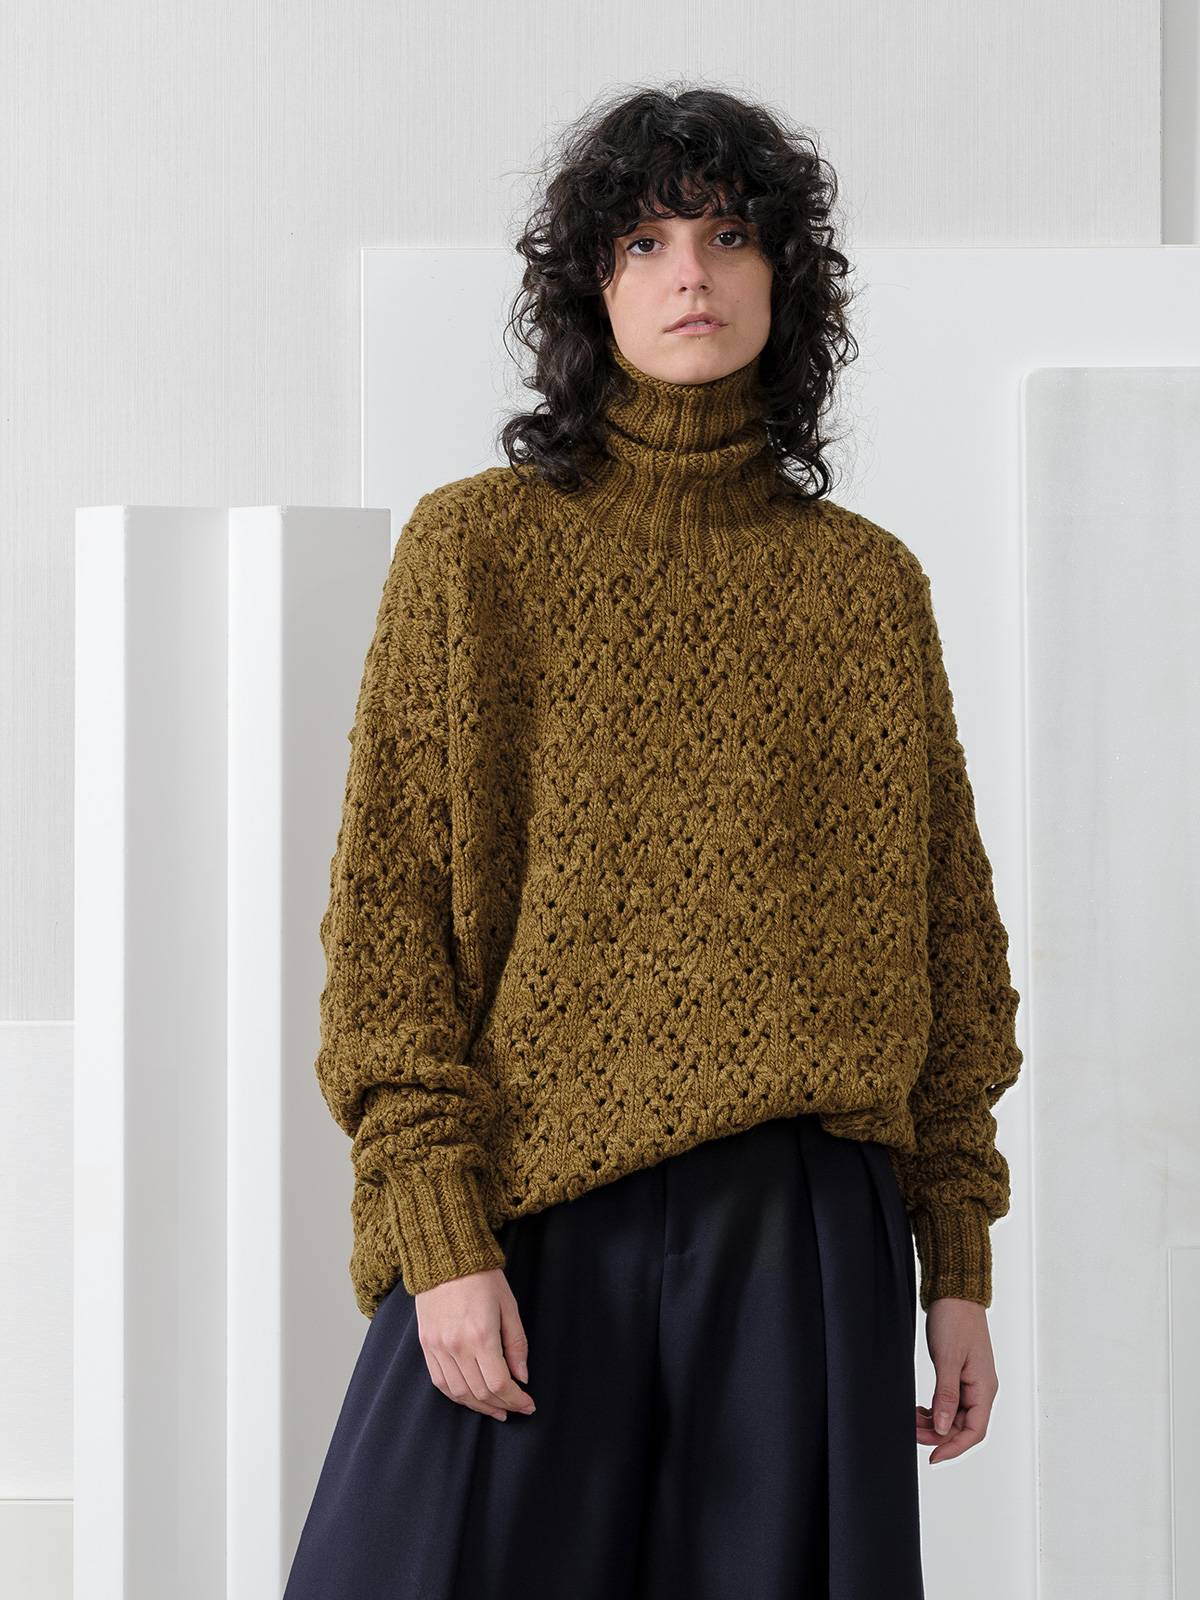 Baby Alpaca & Wool sweaters and cardigans for woman | KNITBRARY